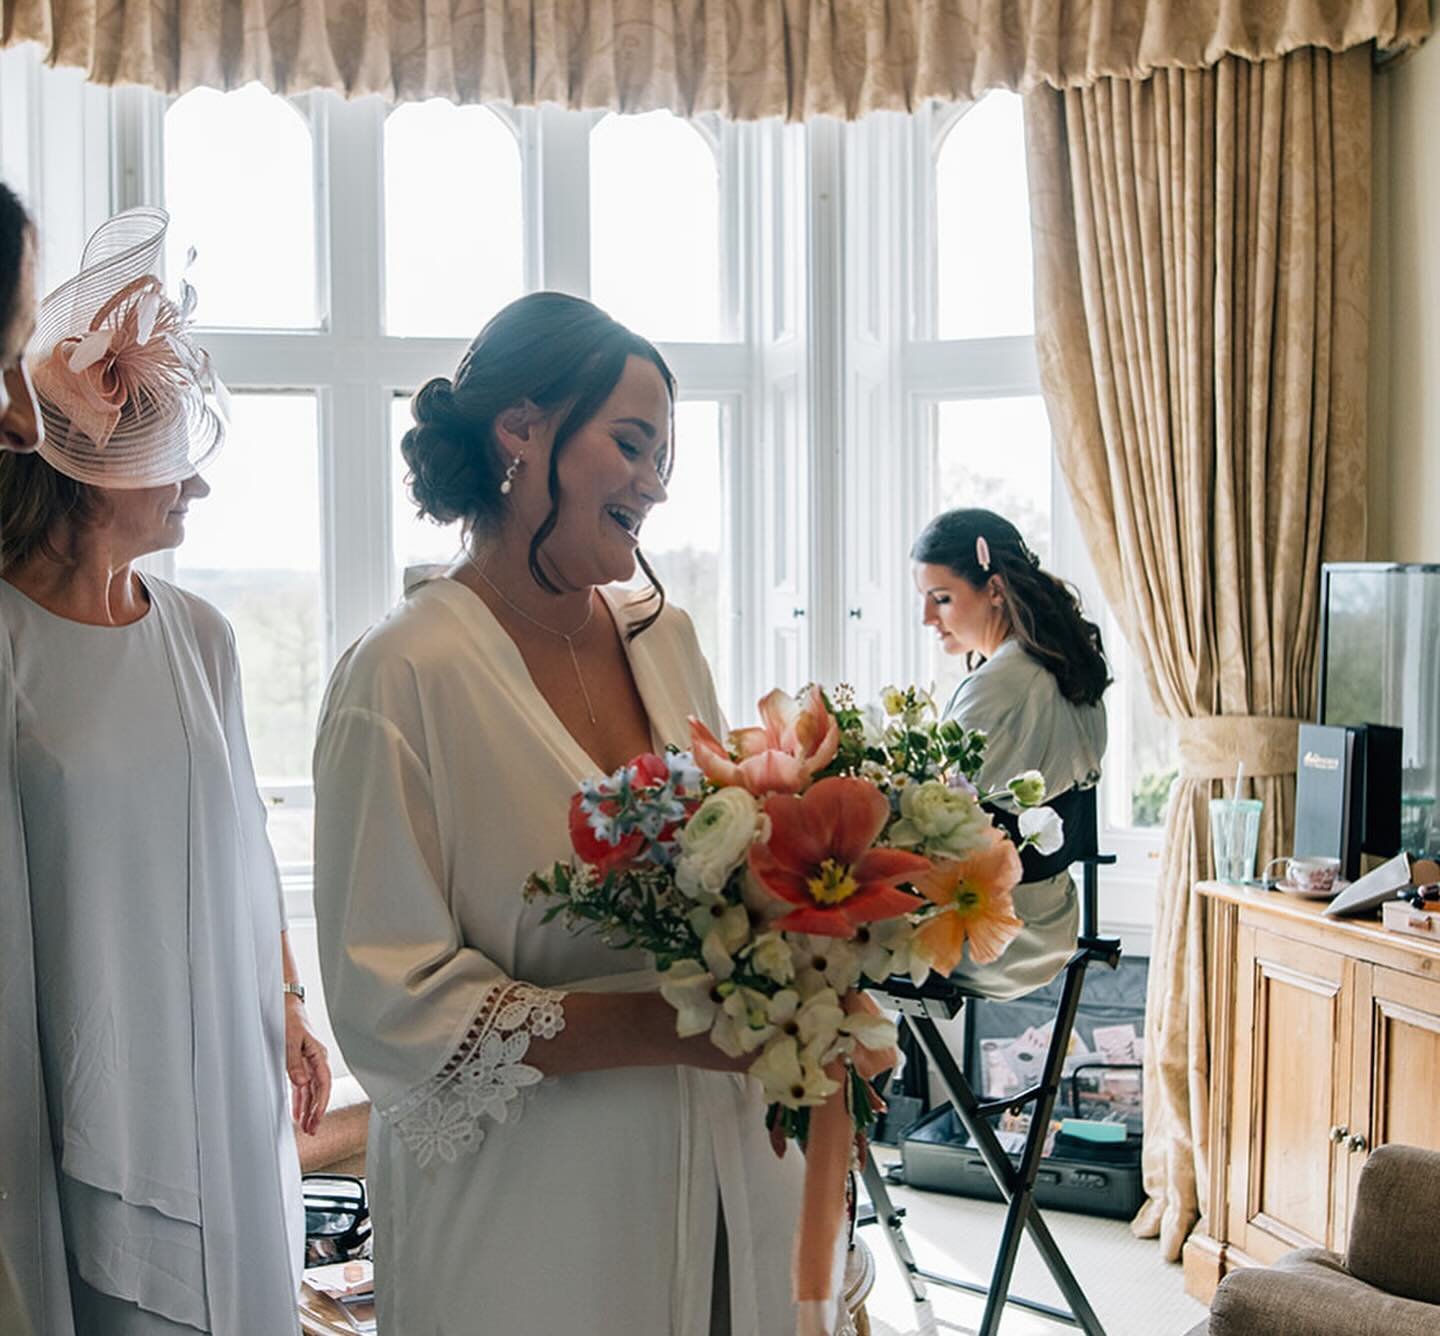 Thank you @thebritishphotographers for capturing this moment so beautifully! 

One thing I love about being a wedding florist is that  the flowers are one of the only aspects of their wedding day that remains a surprise. I will never get bored of the